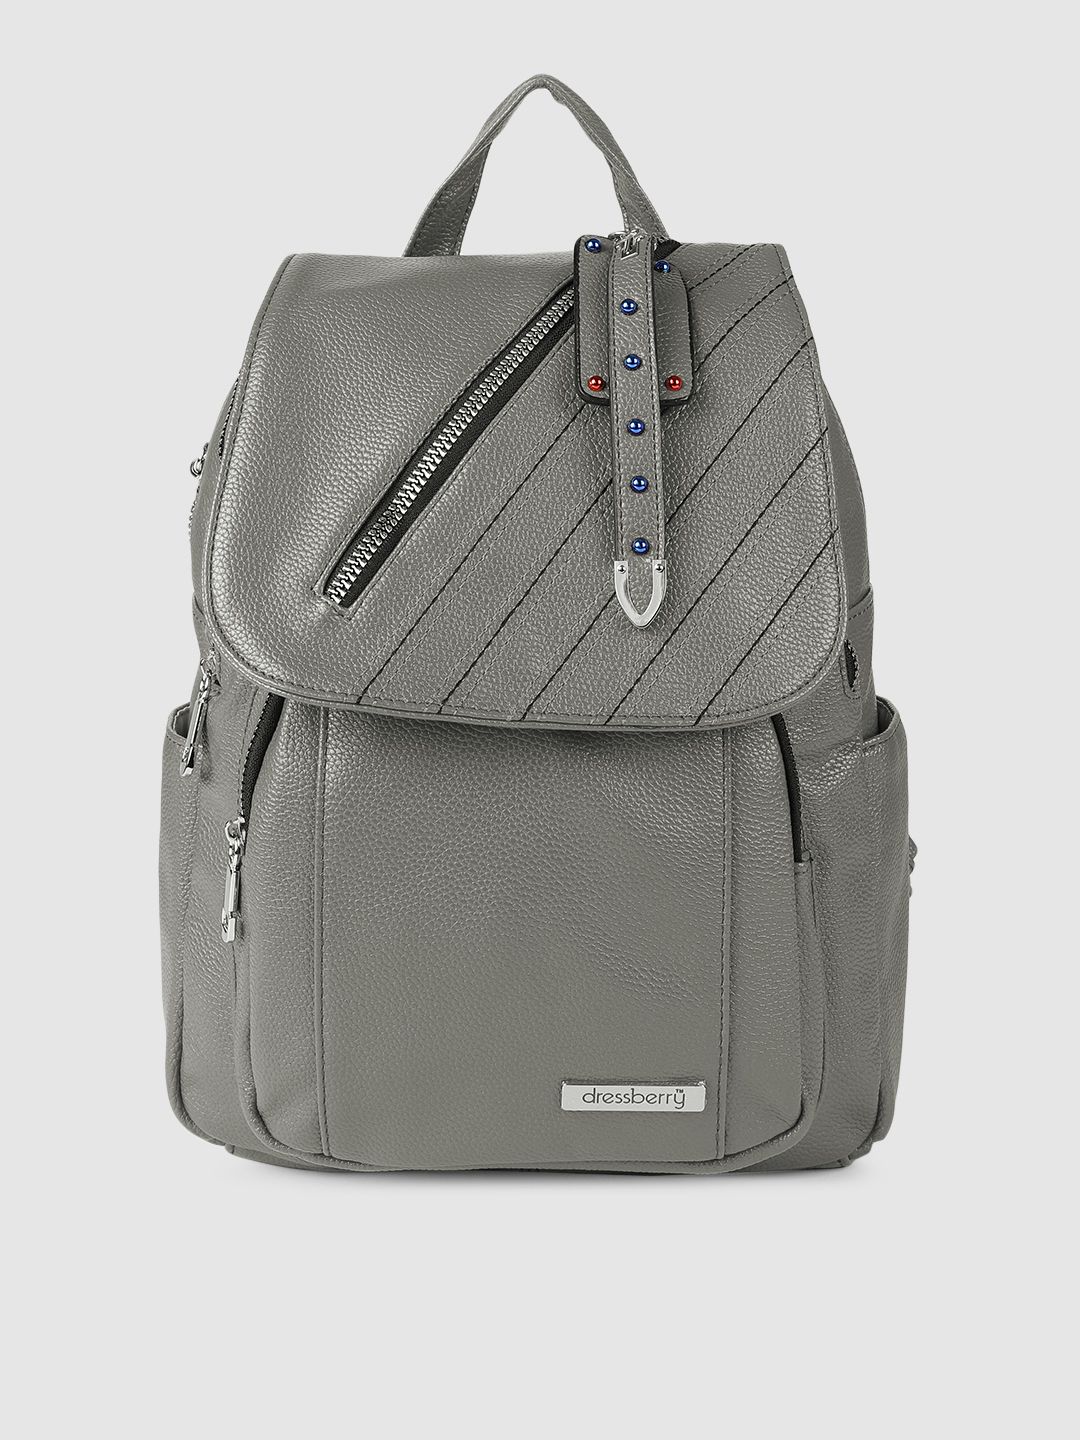 DressBerry Women Grey Embellished Backpack Price in India